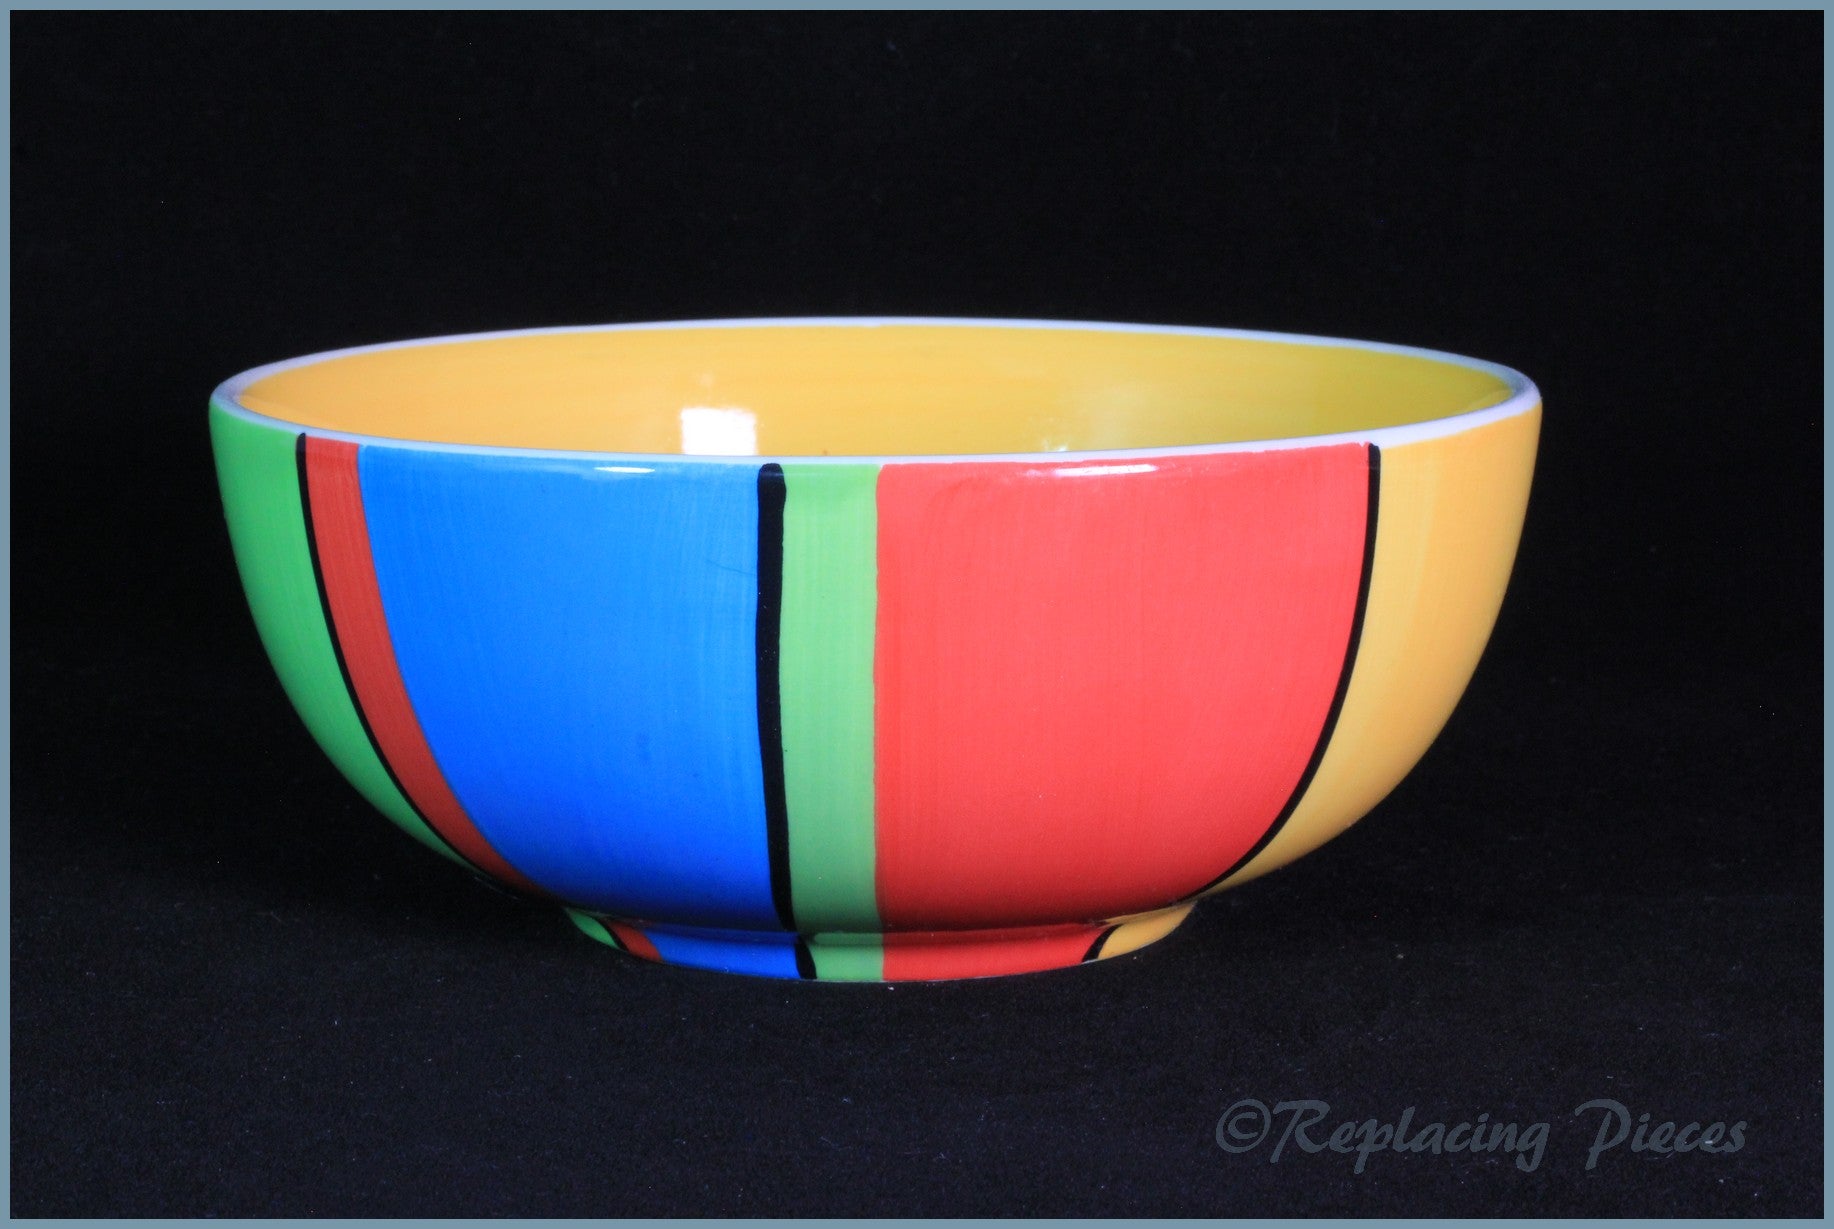 RPW50 - Whittards - Cereal Bowl (Stripes)